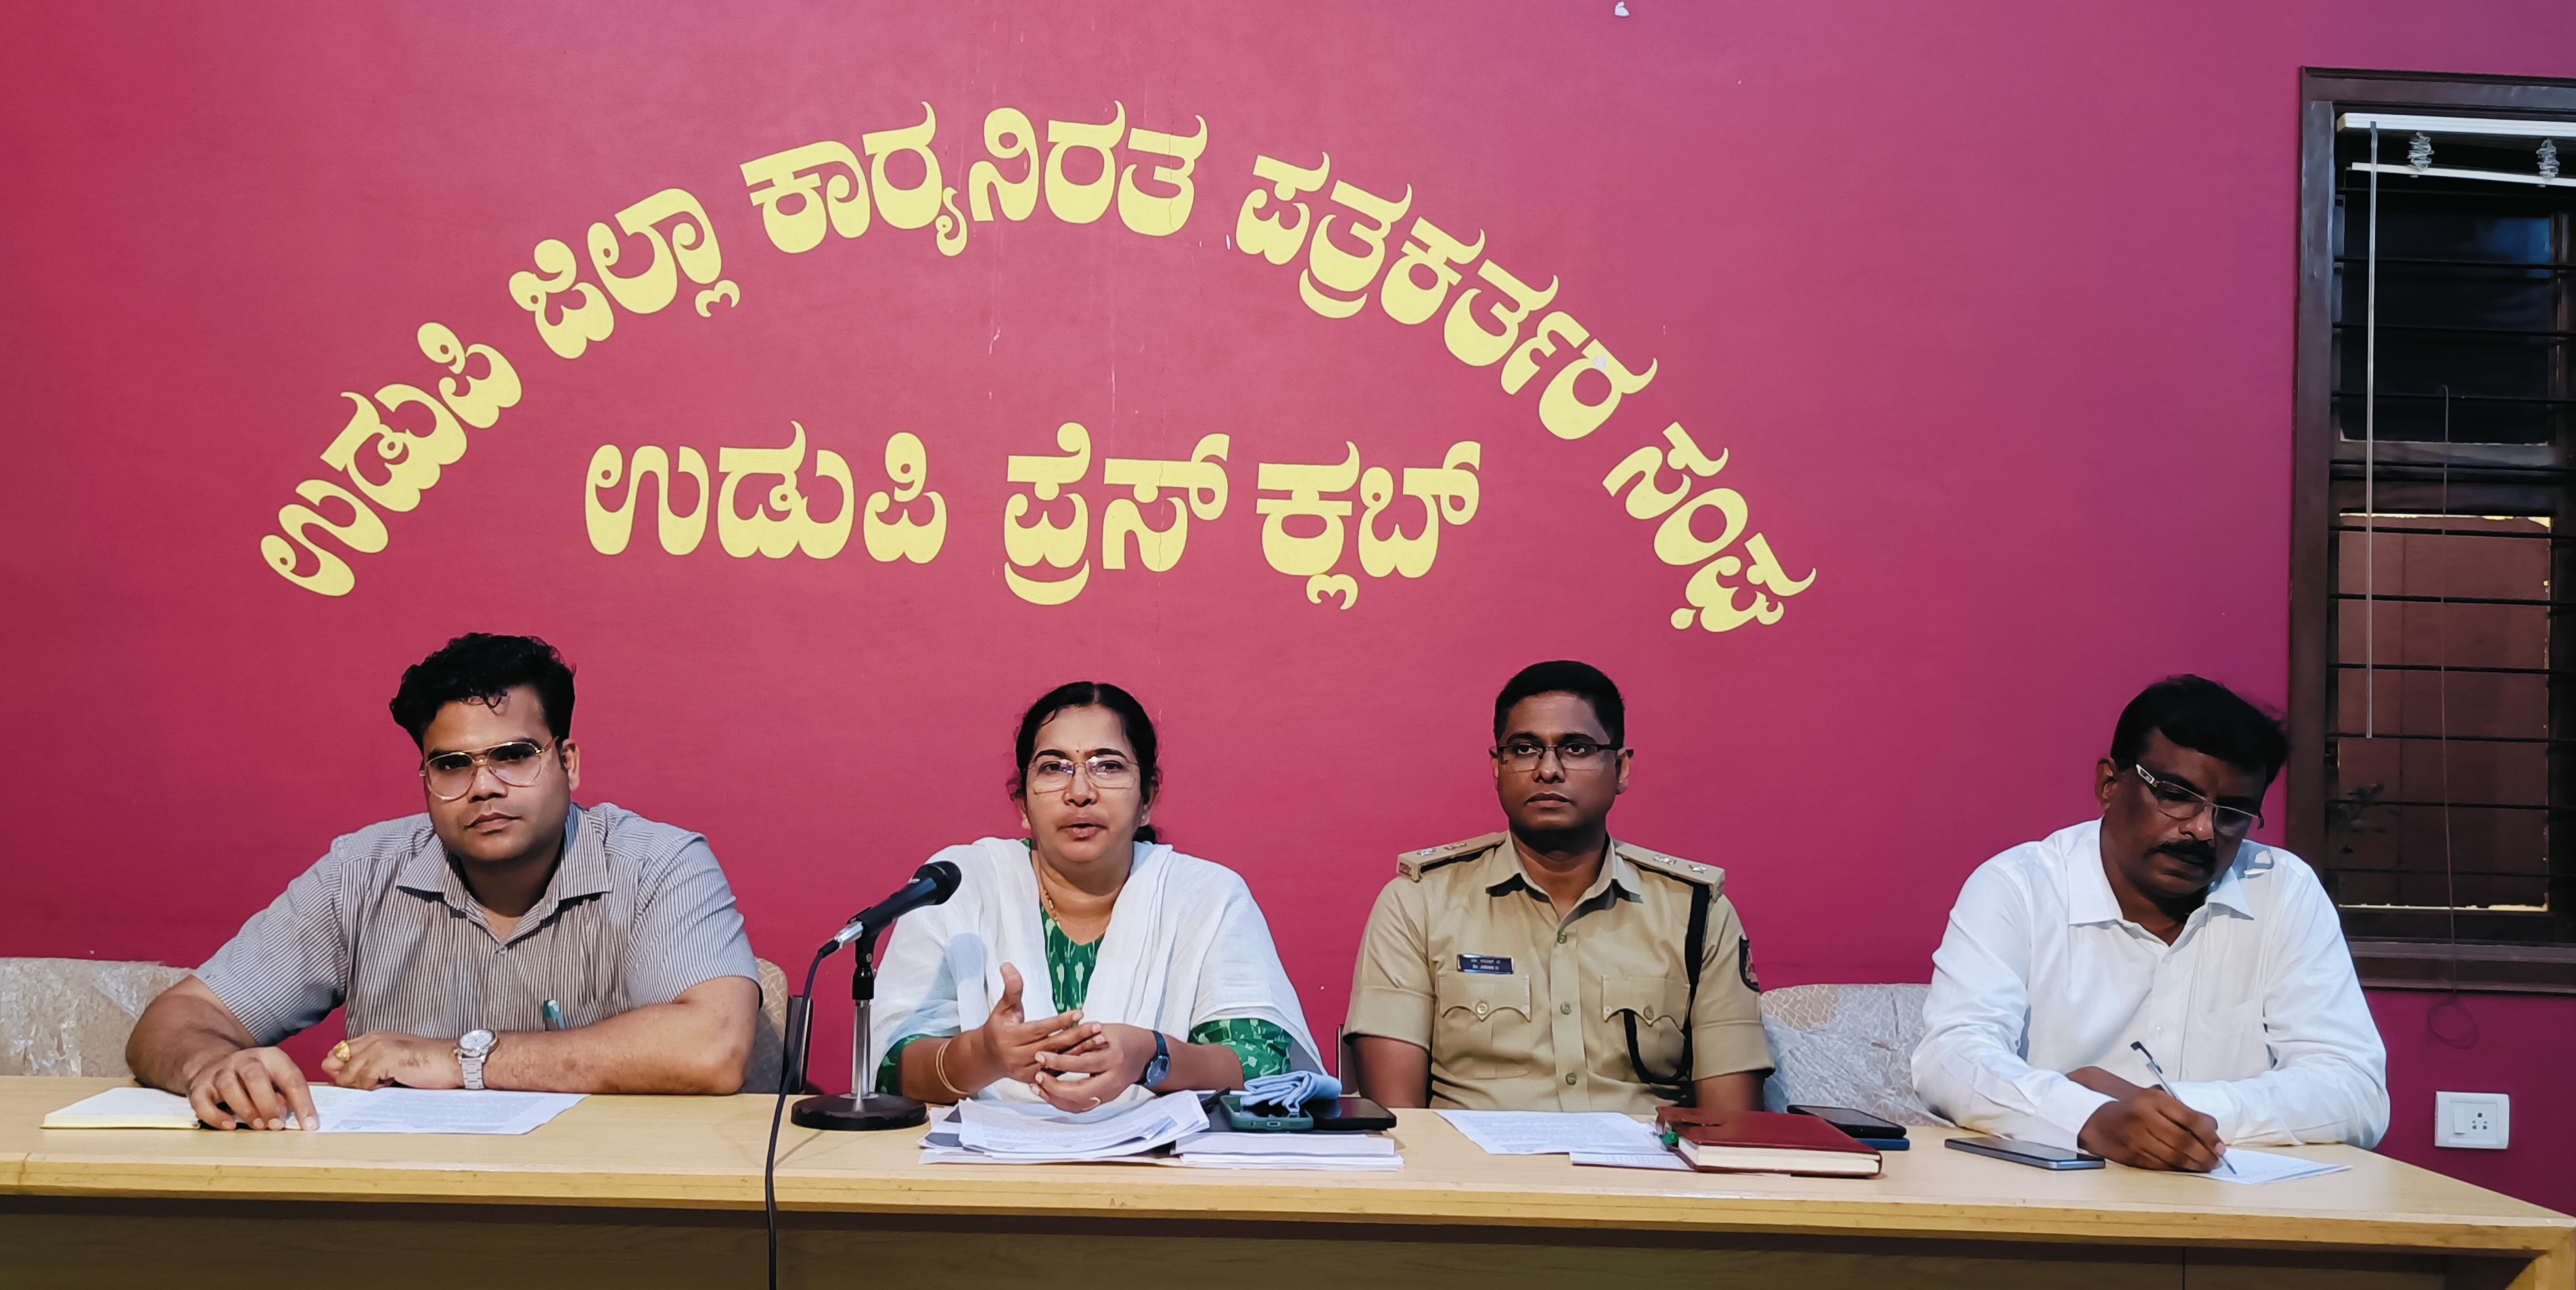 Be careful not to violate election code of conduct in media publications: District Collector Dr K. Vidyakumari